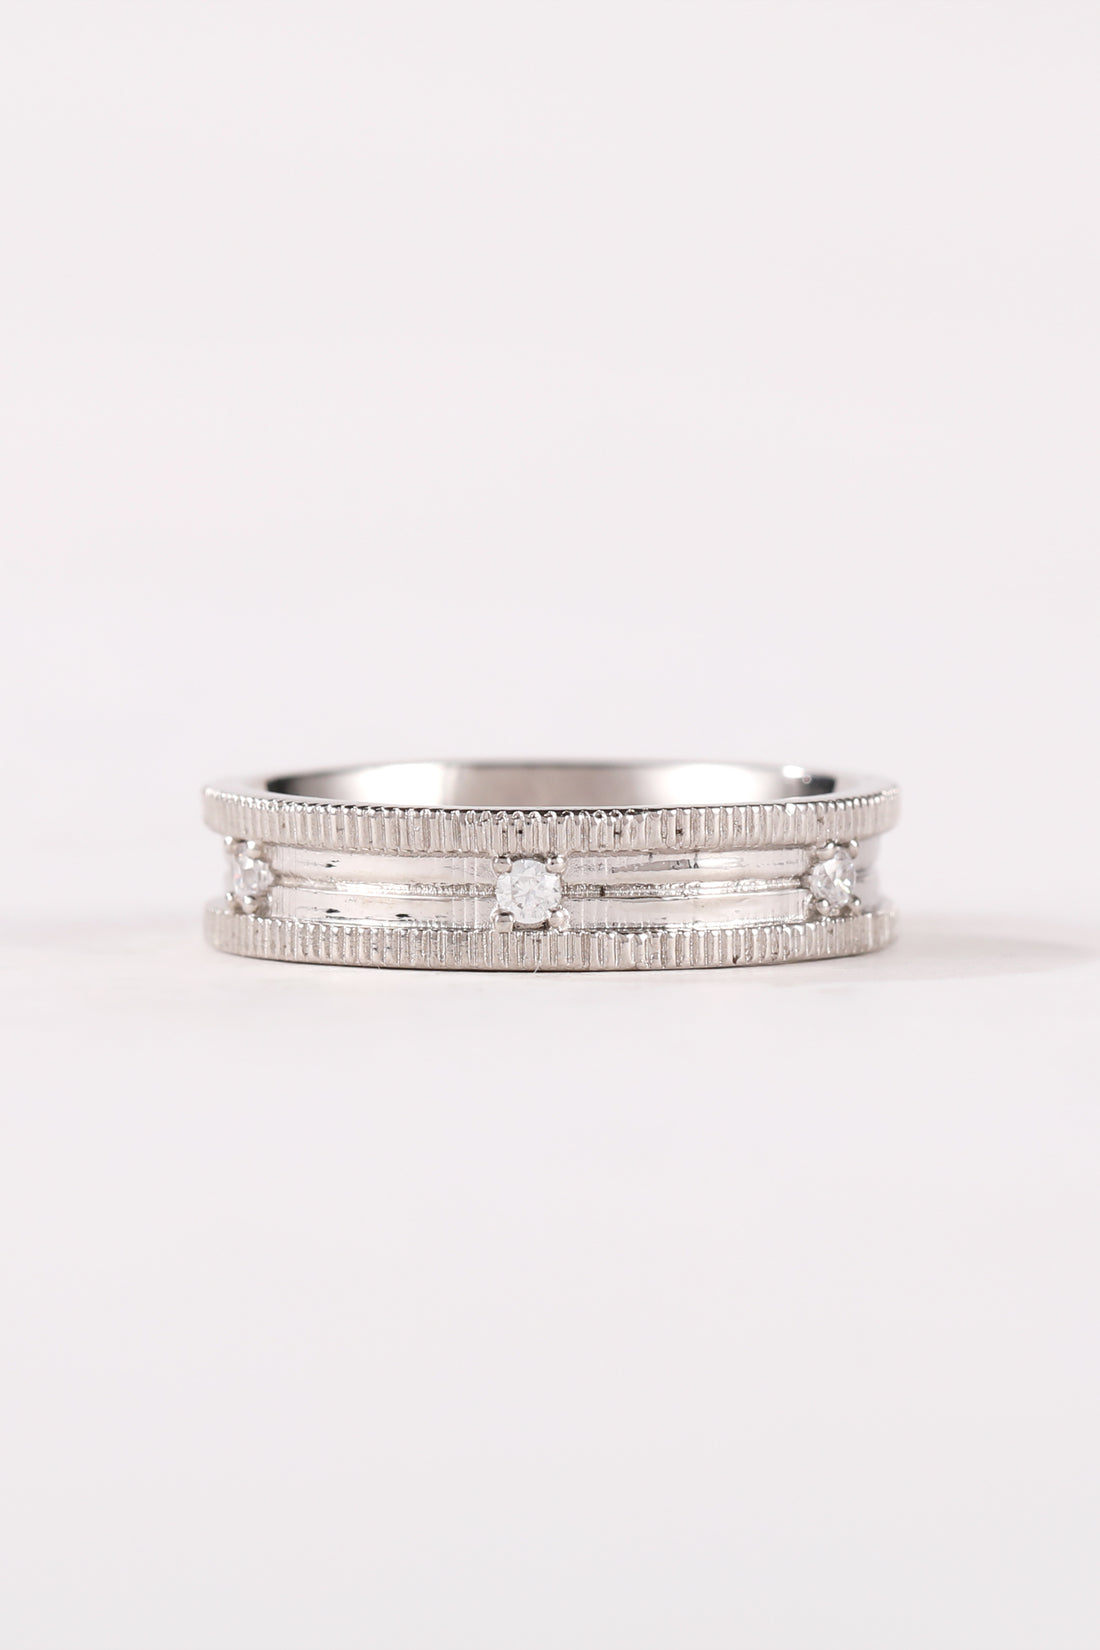 Lasting Harmony Men Silver Band Ring- Valentine Special